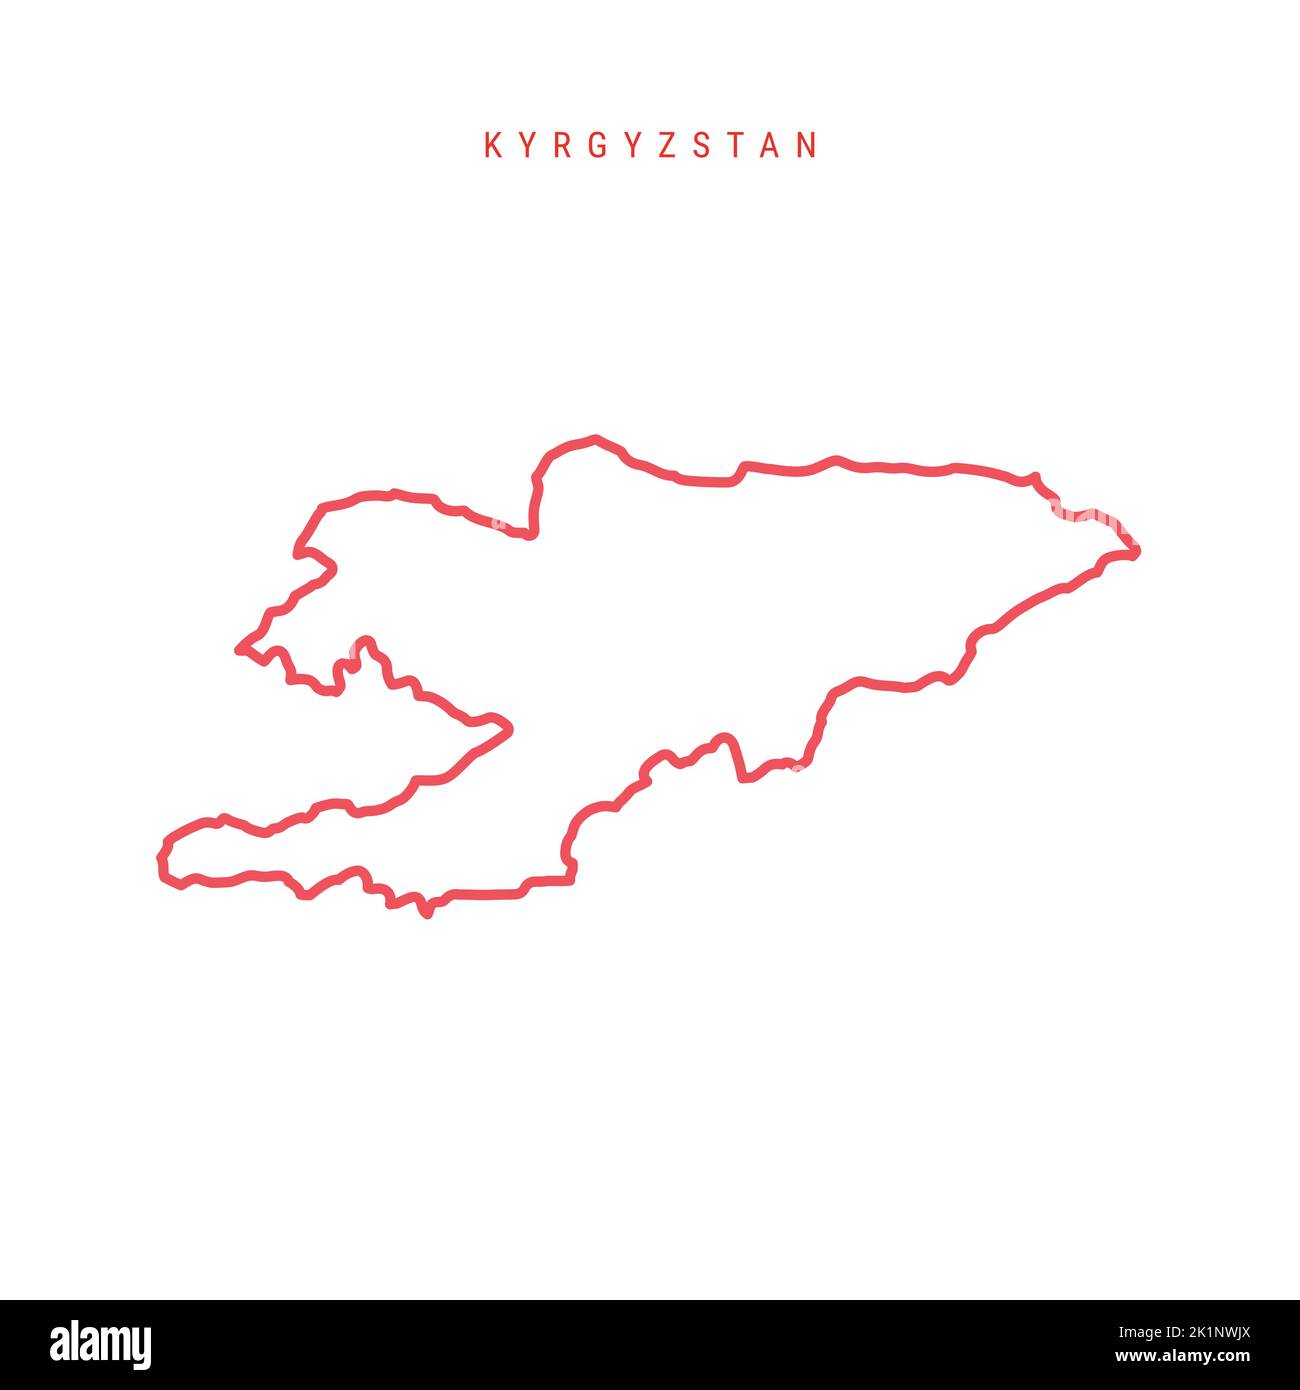 Kyrgyzstan editable outline map. Kyrgyz red border. Country name. Adjust line weight. Change to any color. Vector illustration. Stock Vector